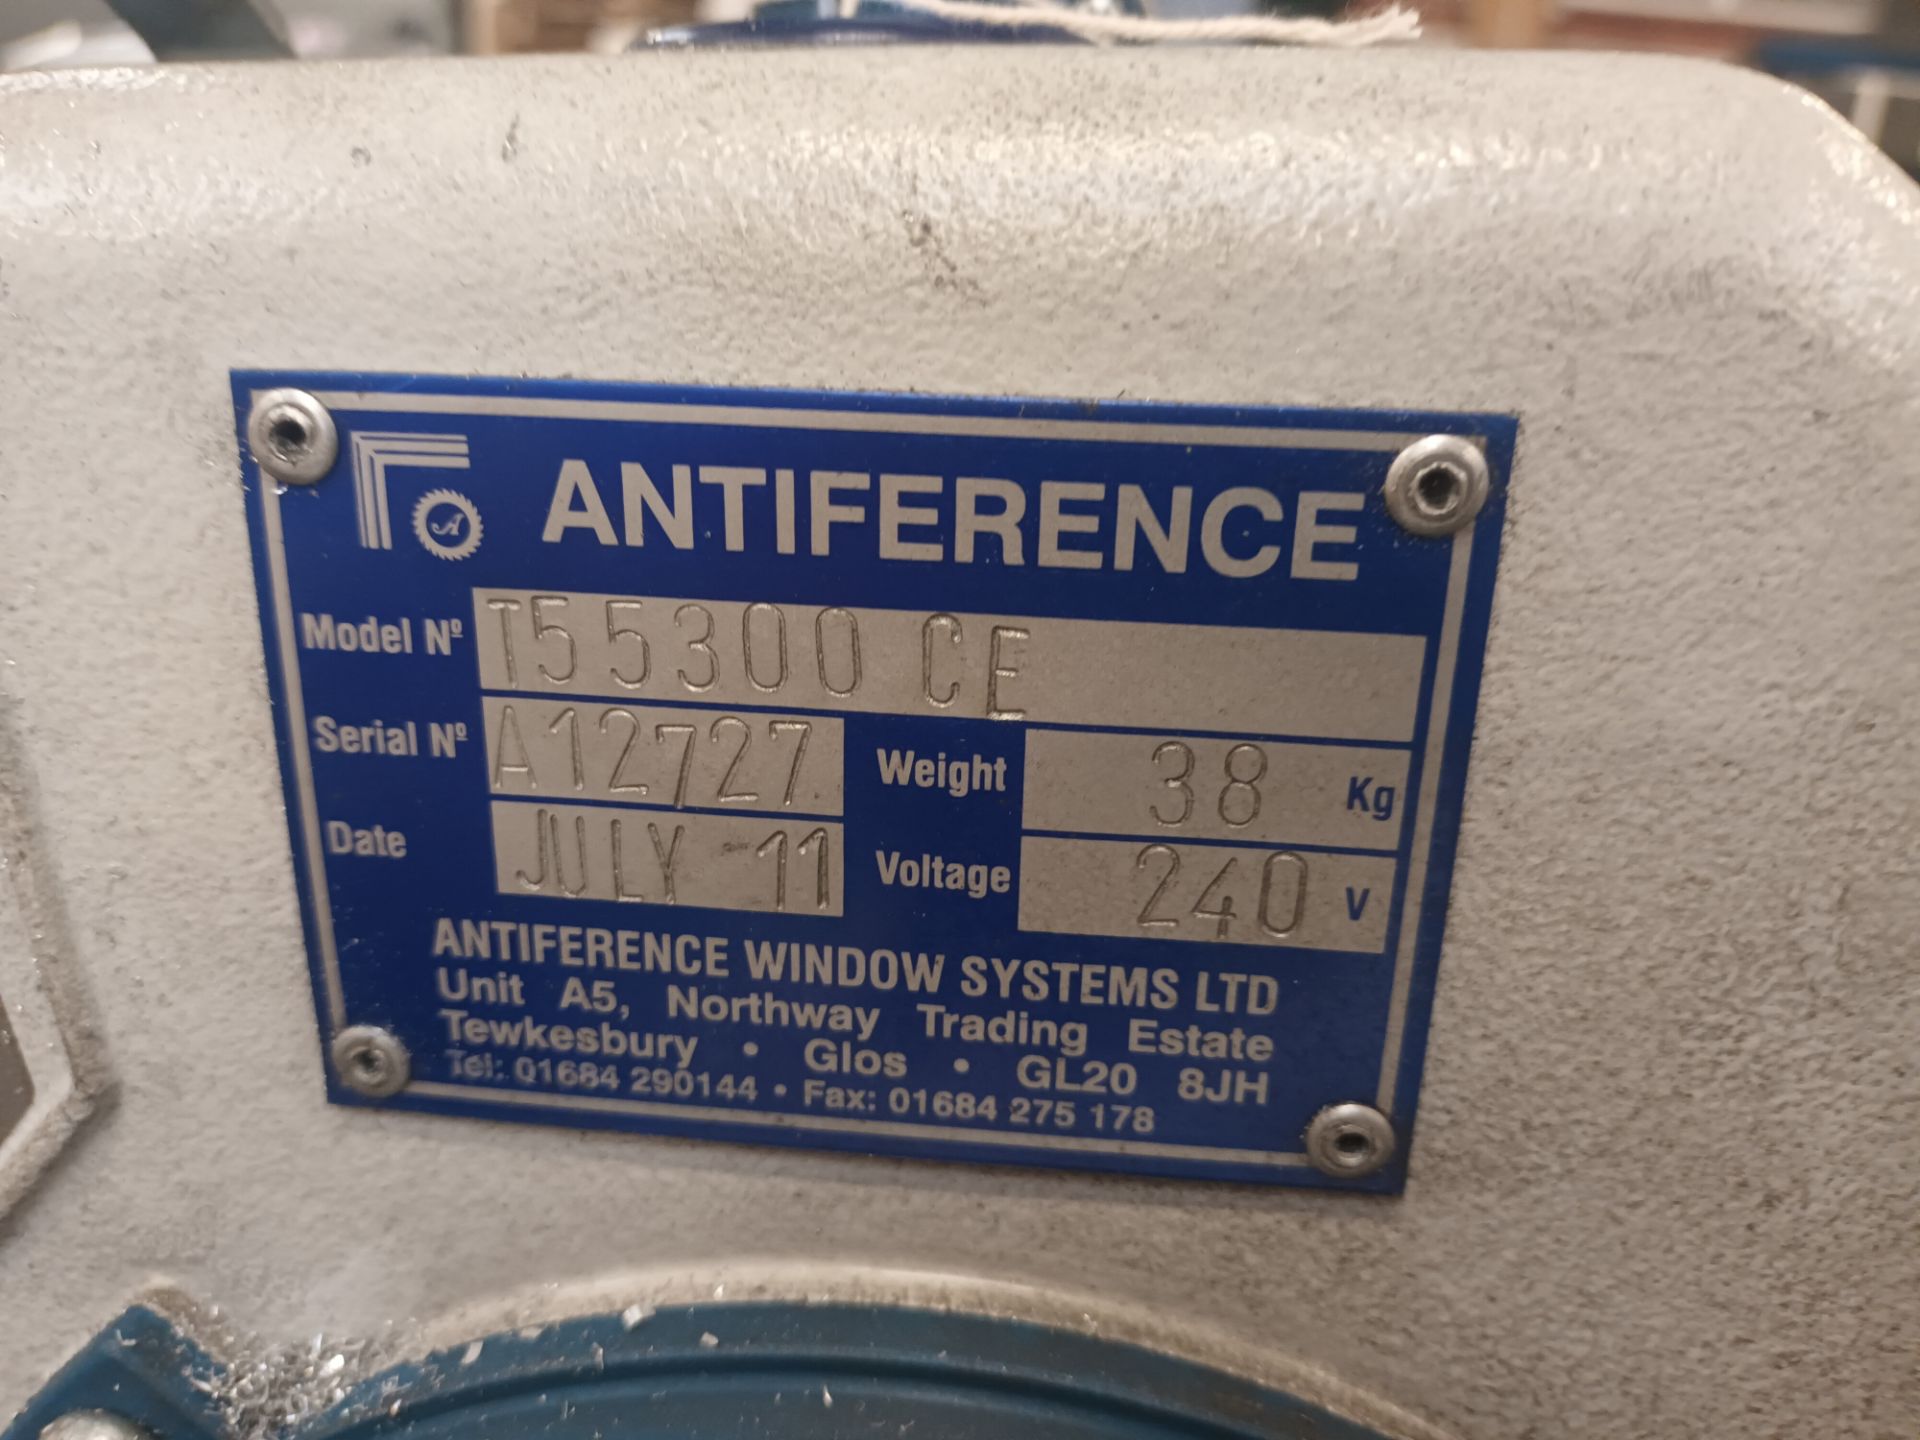 Antiference T55300 CE Pull Down Saw with table - Image 2 of 4